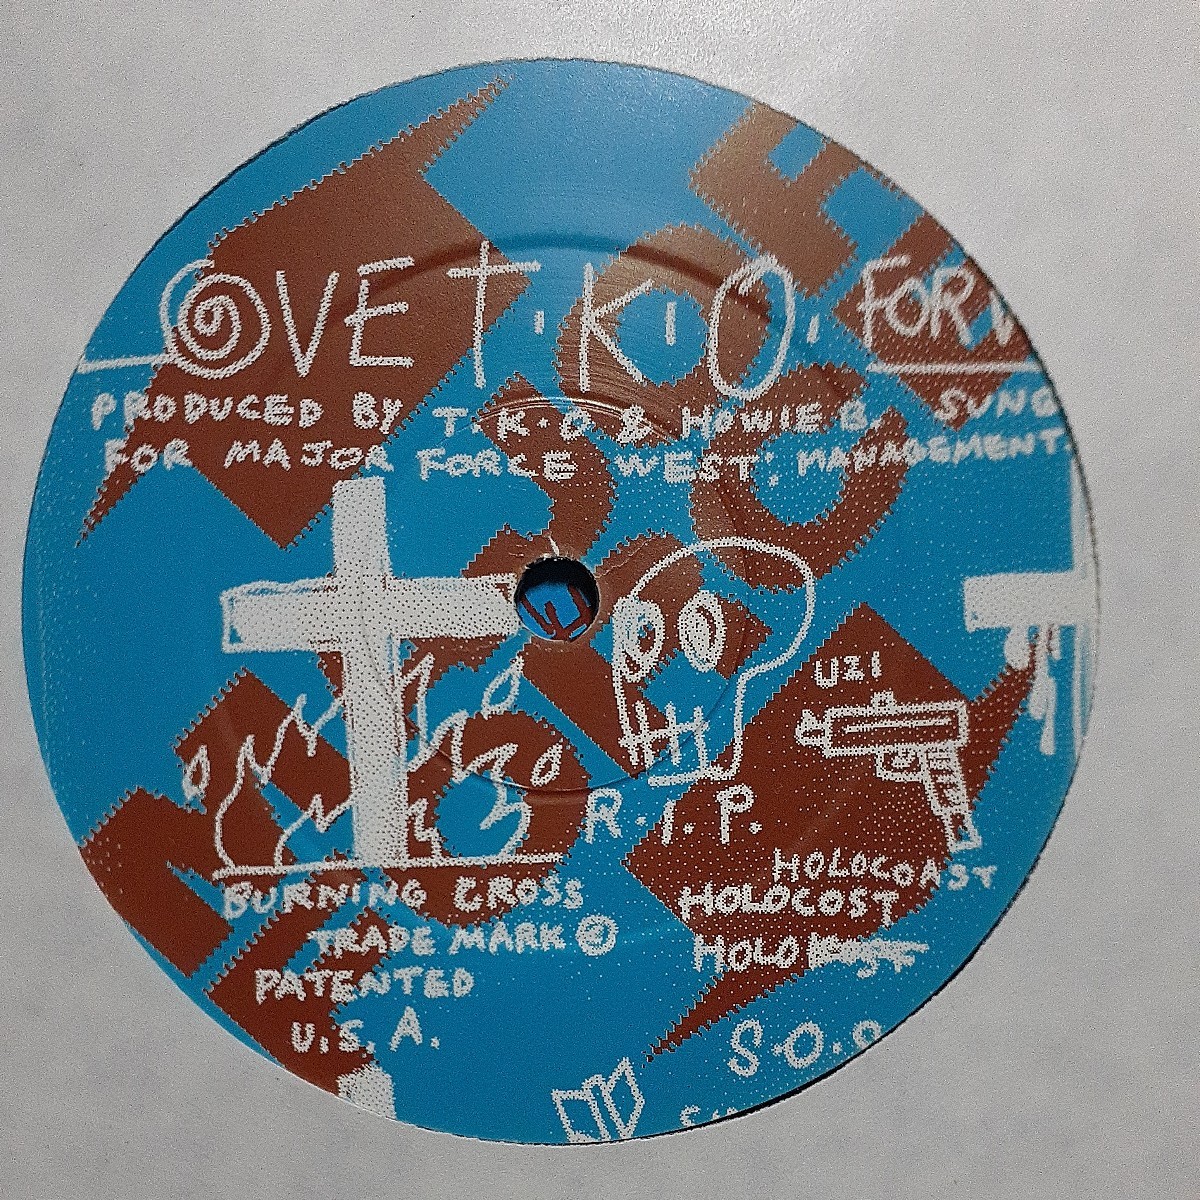 LOVE T.K.O. / FOR WHAT IT'S WORTH / DESERT SONG /TOSHIO NAKANISHI,中西俊夫,TYCOON TOSH,K.U.D.O,工藤昌之,HOWIE B,MAJOR FORCE,MO WAX_画像2